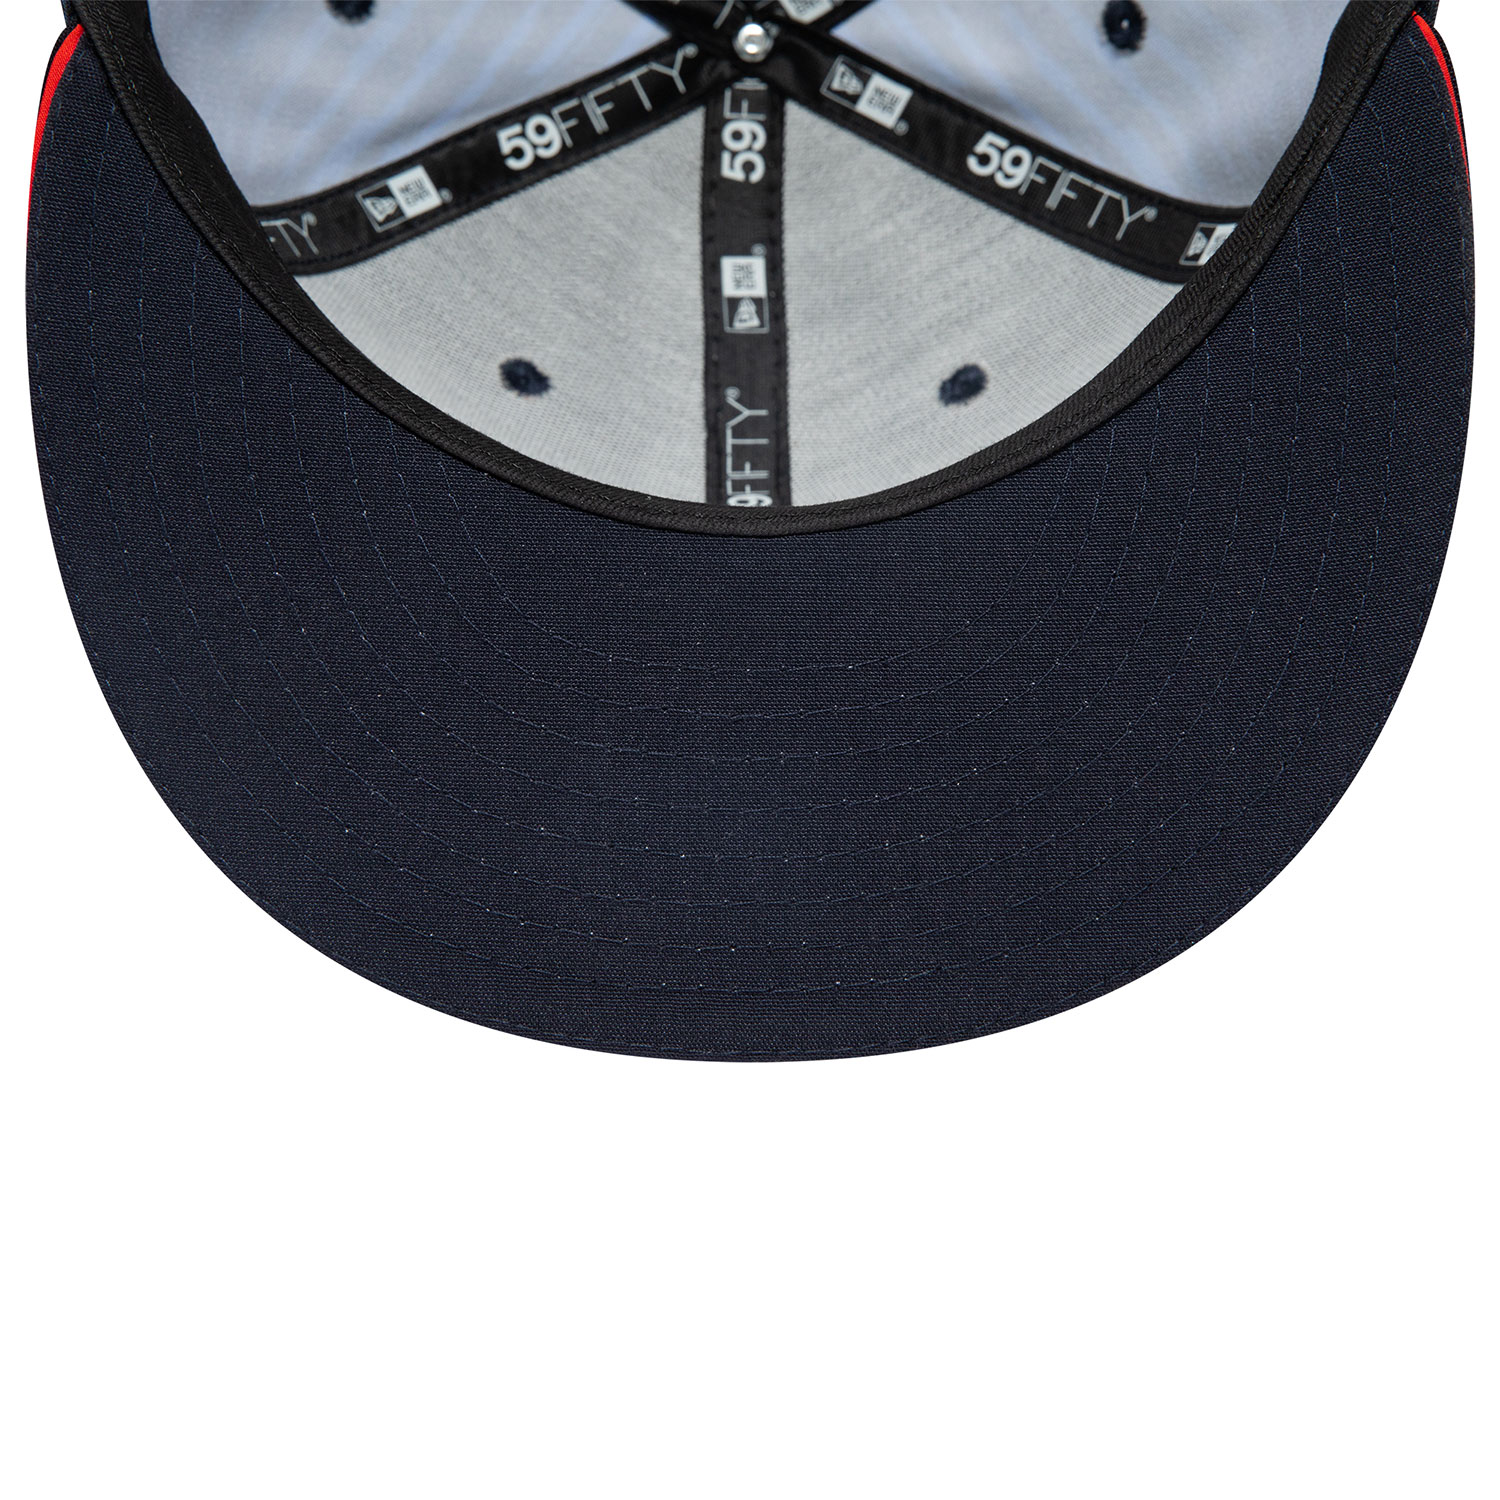 Red Bull Team Navy 59FIFTY Fitted Cap